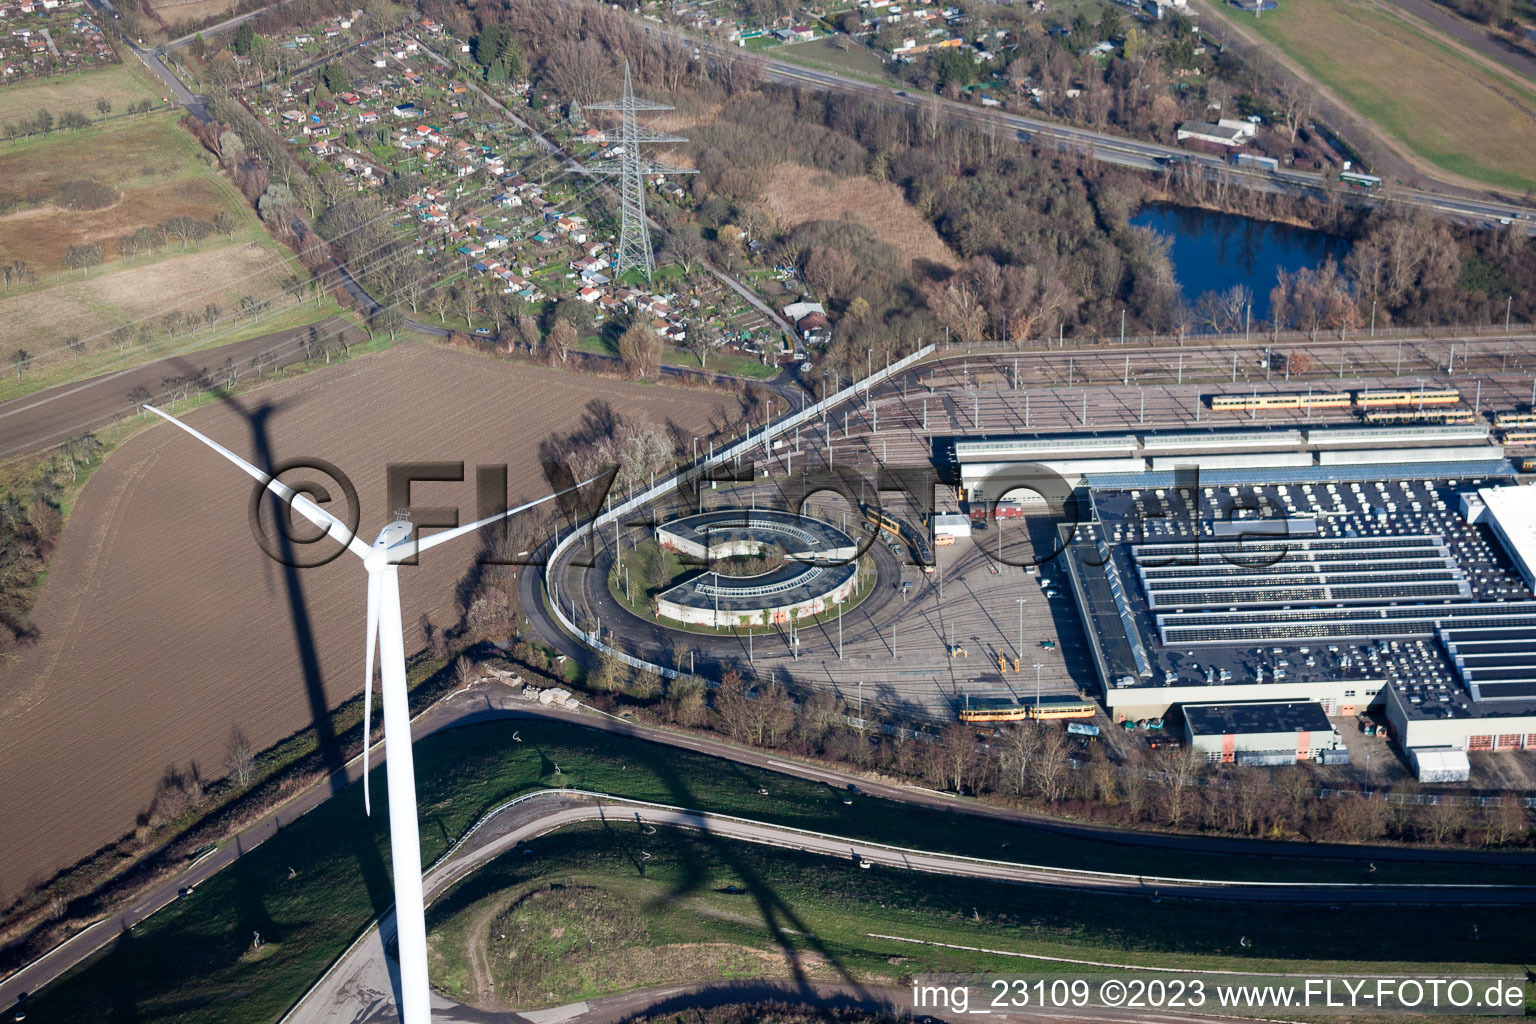 WKA on the garbage heap in the district Rheinhafen in Karlsruhe in the state Baden-Wuerttemberg, Germany from above